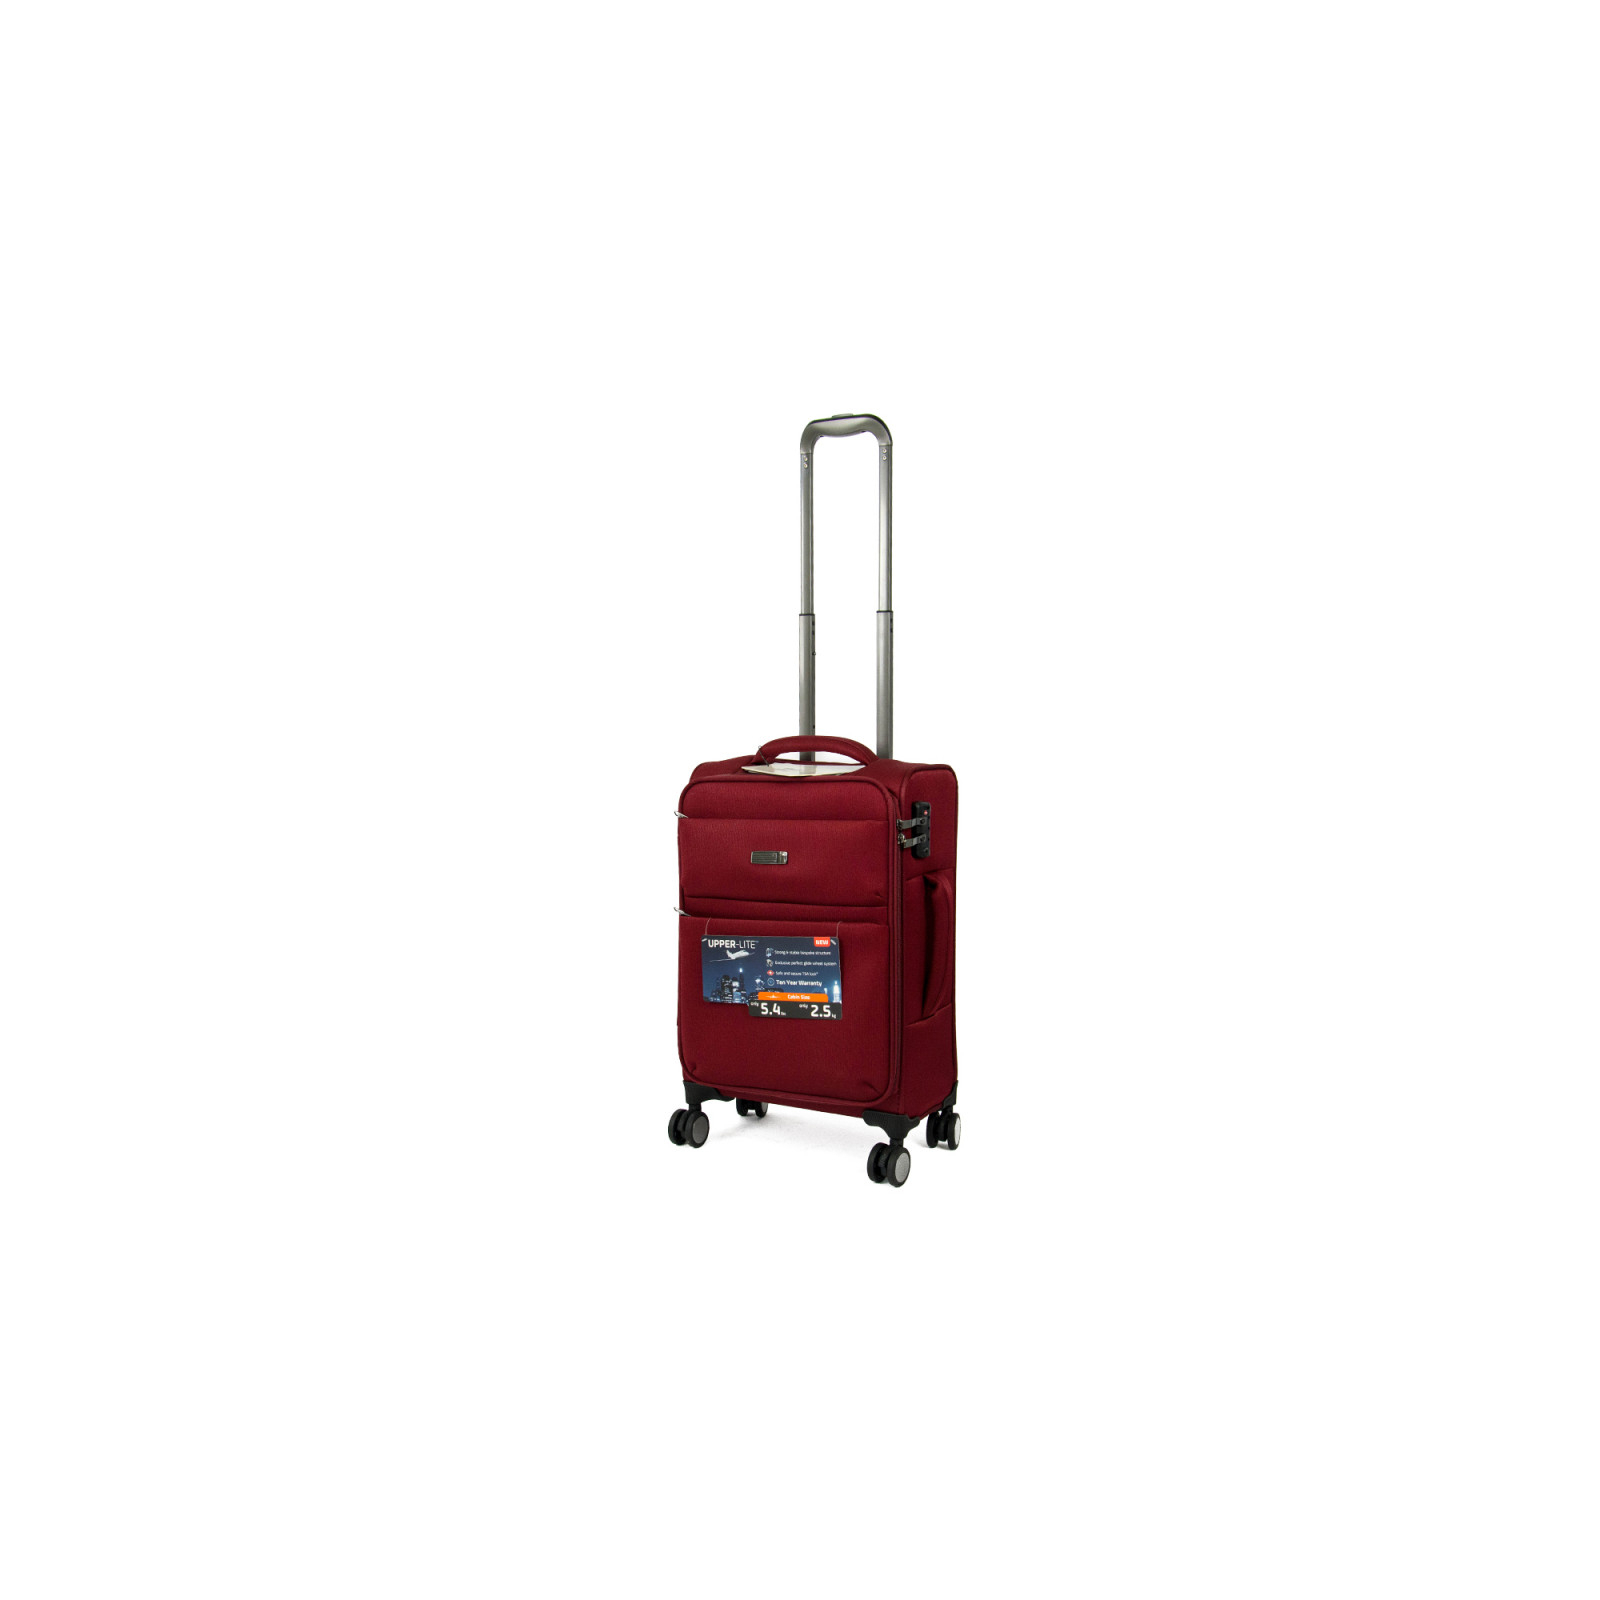 Валіза IT Luggage Dignified Navy S (IT12-2344-08-S-S901)